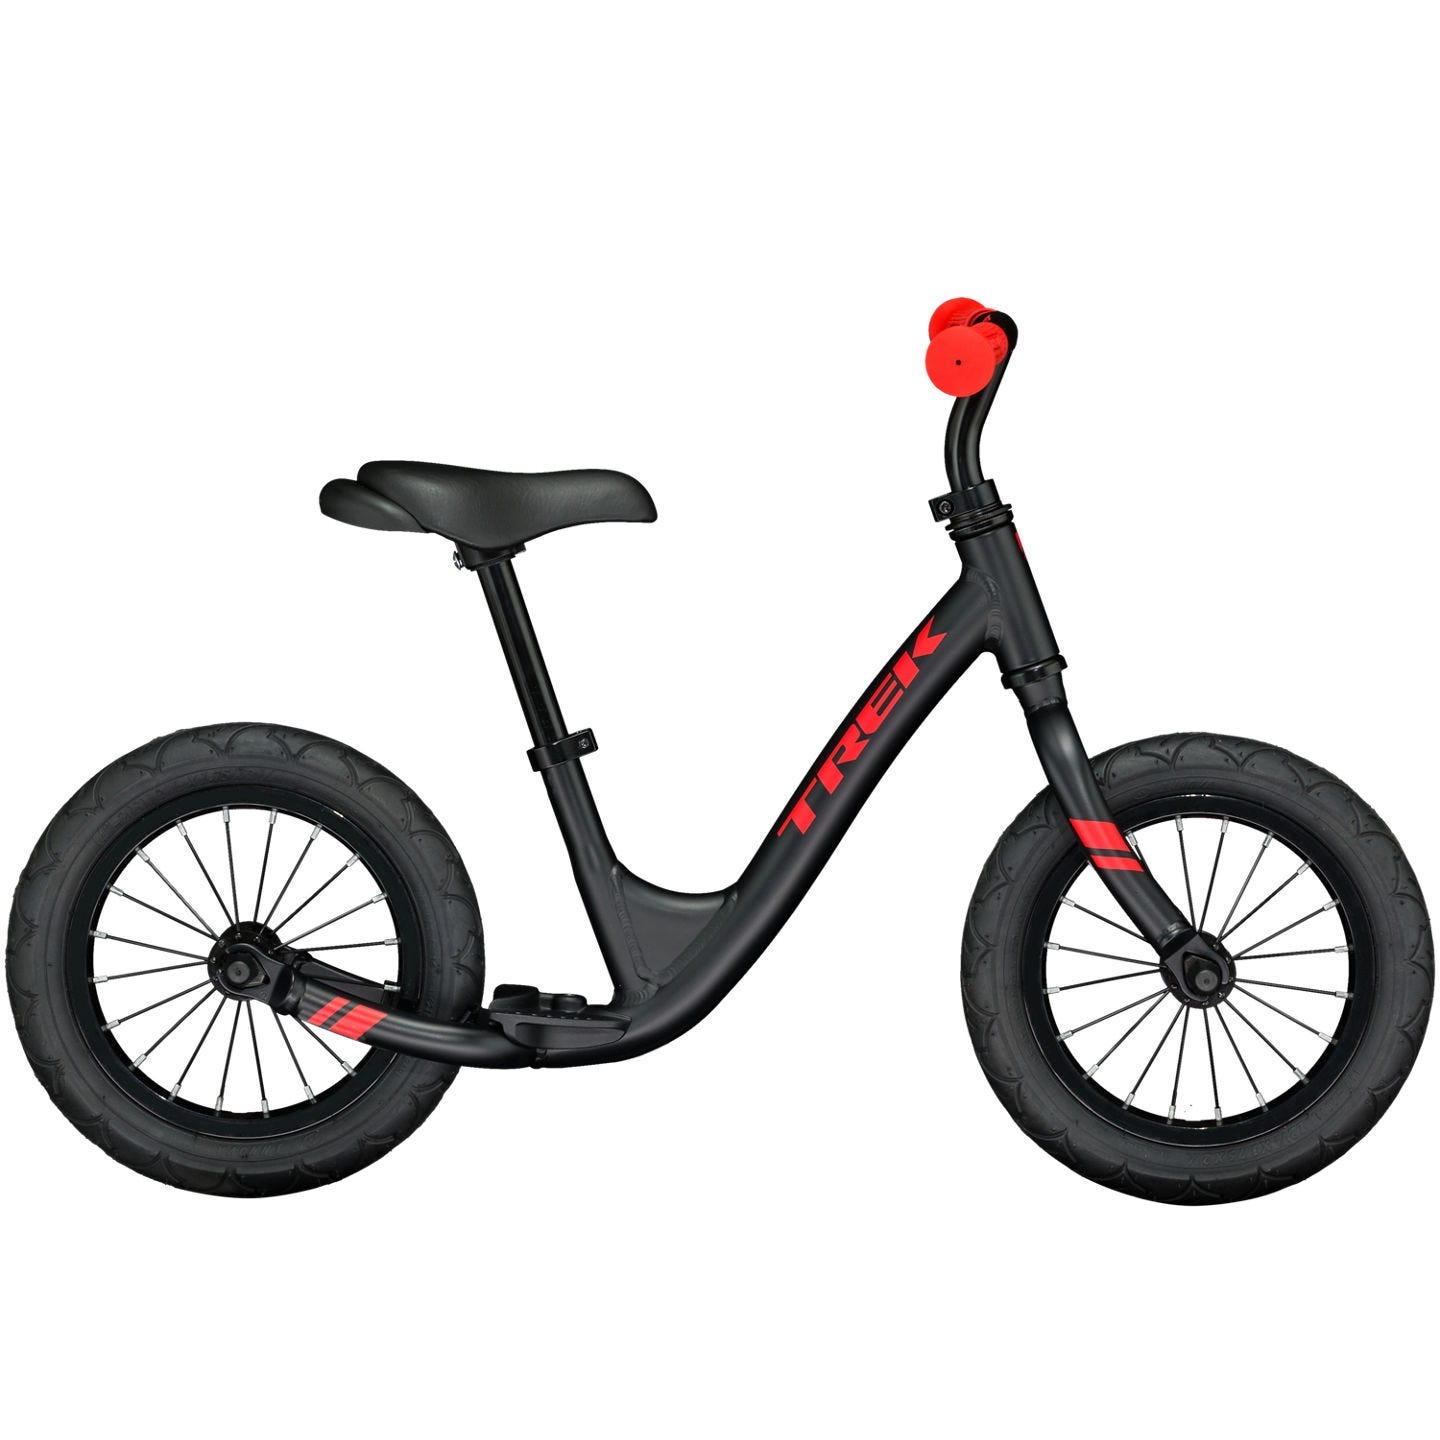 12 inch black with red detailing kids bike without pedals Trek Kickster